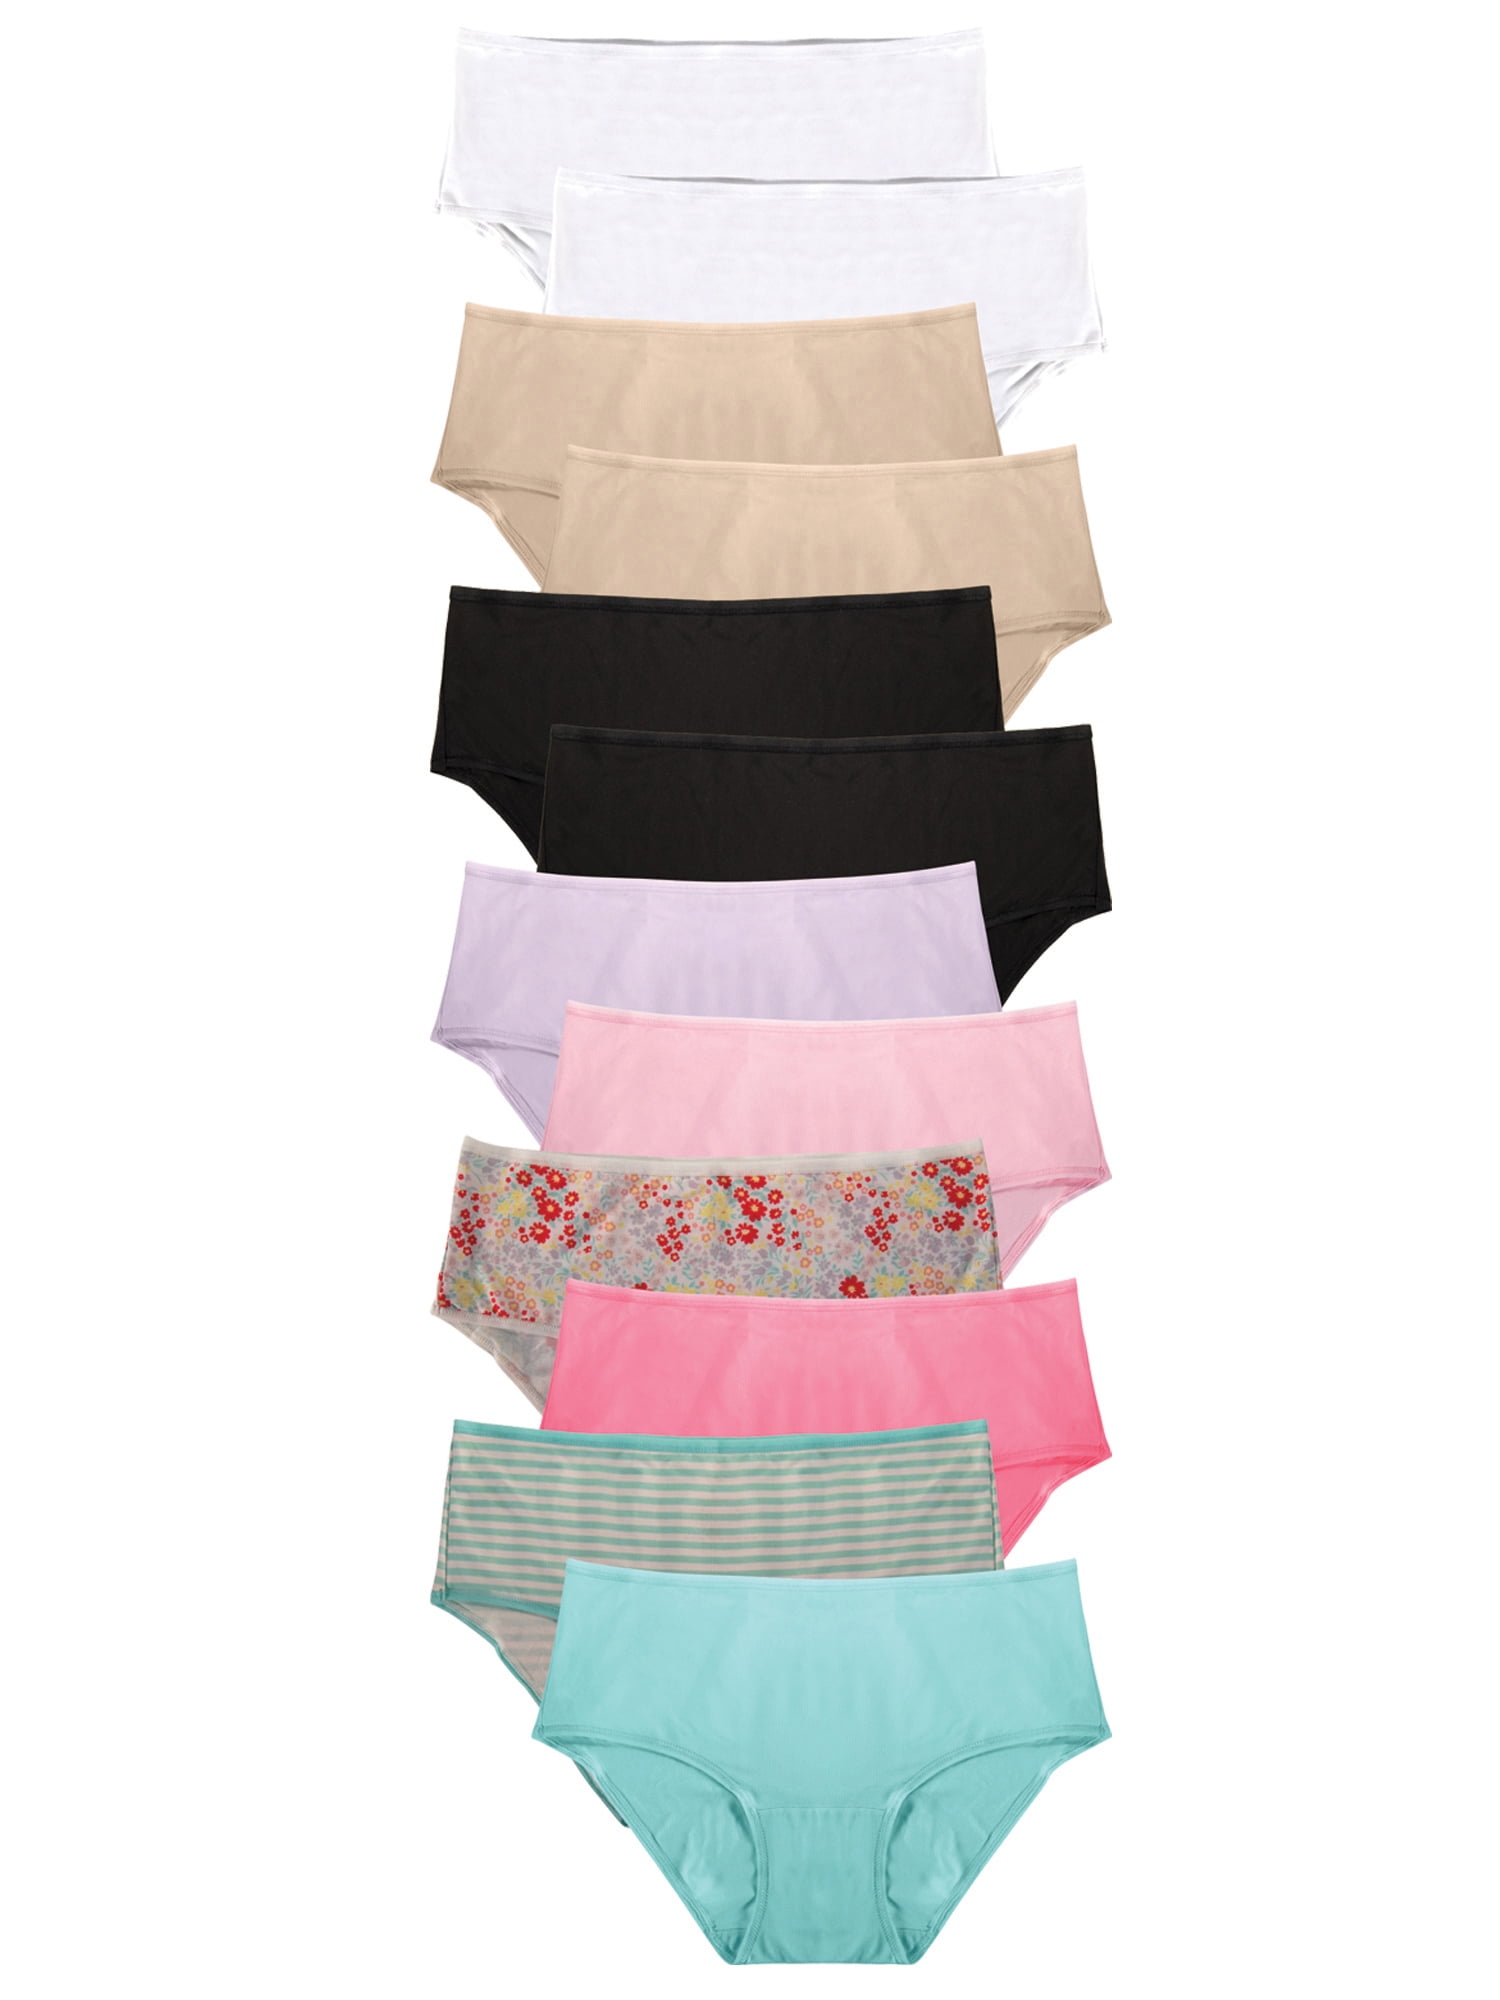 Secret Treasures Cheeky Silhouette Polyester Spandex Panty (Women's) 12 Pack  